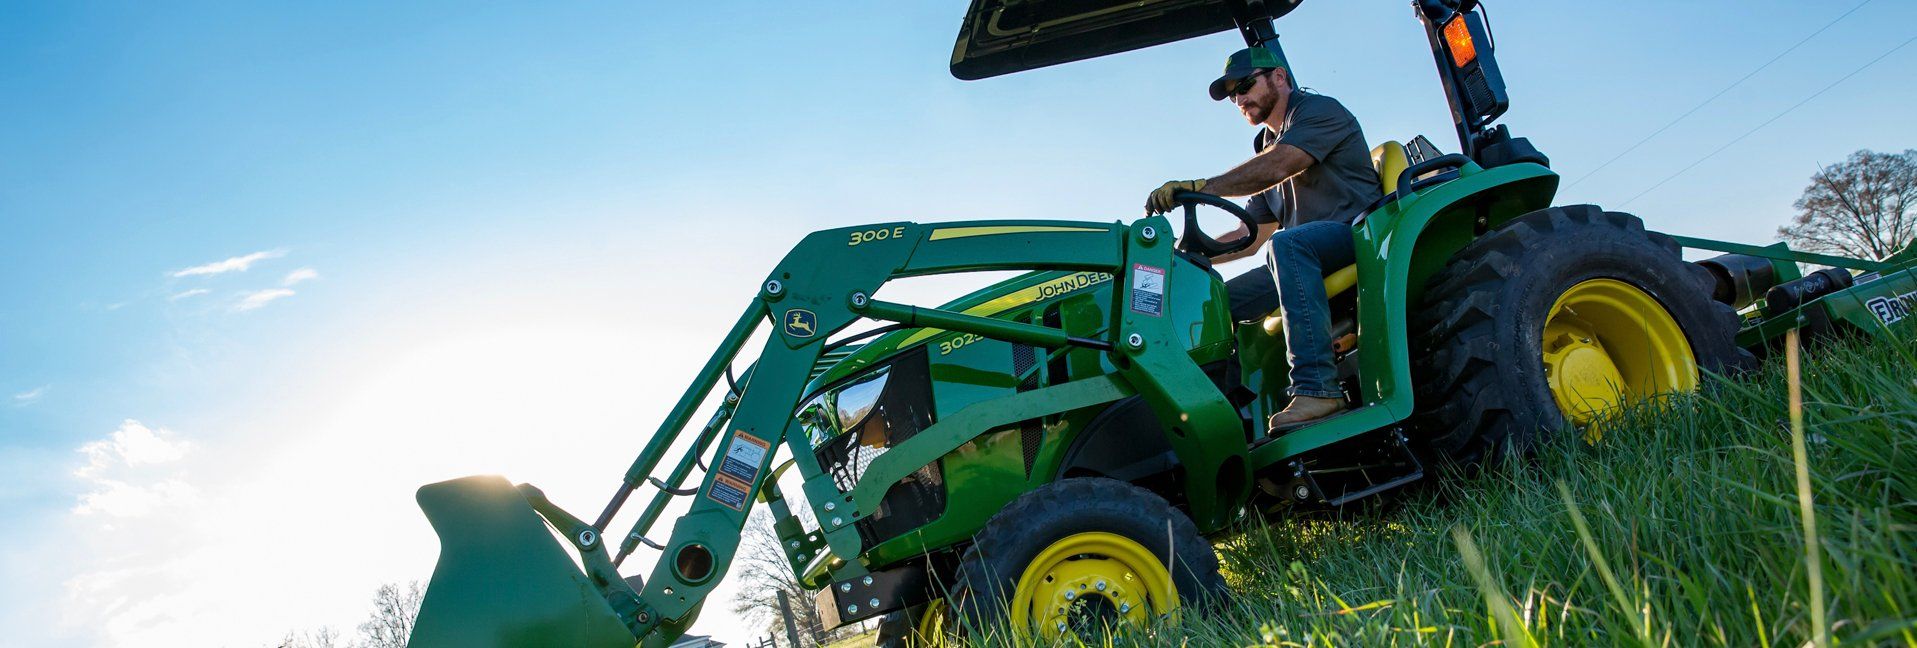 Put a Compact Tractor to Work on Your Acreage